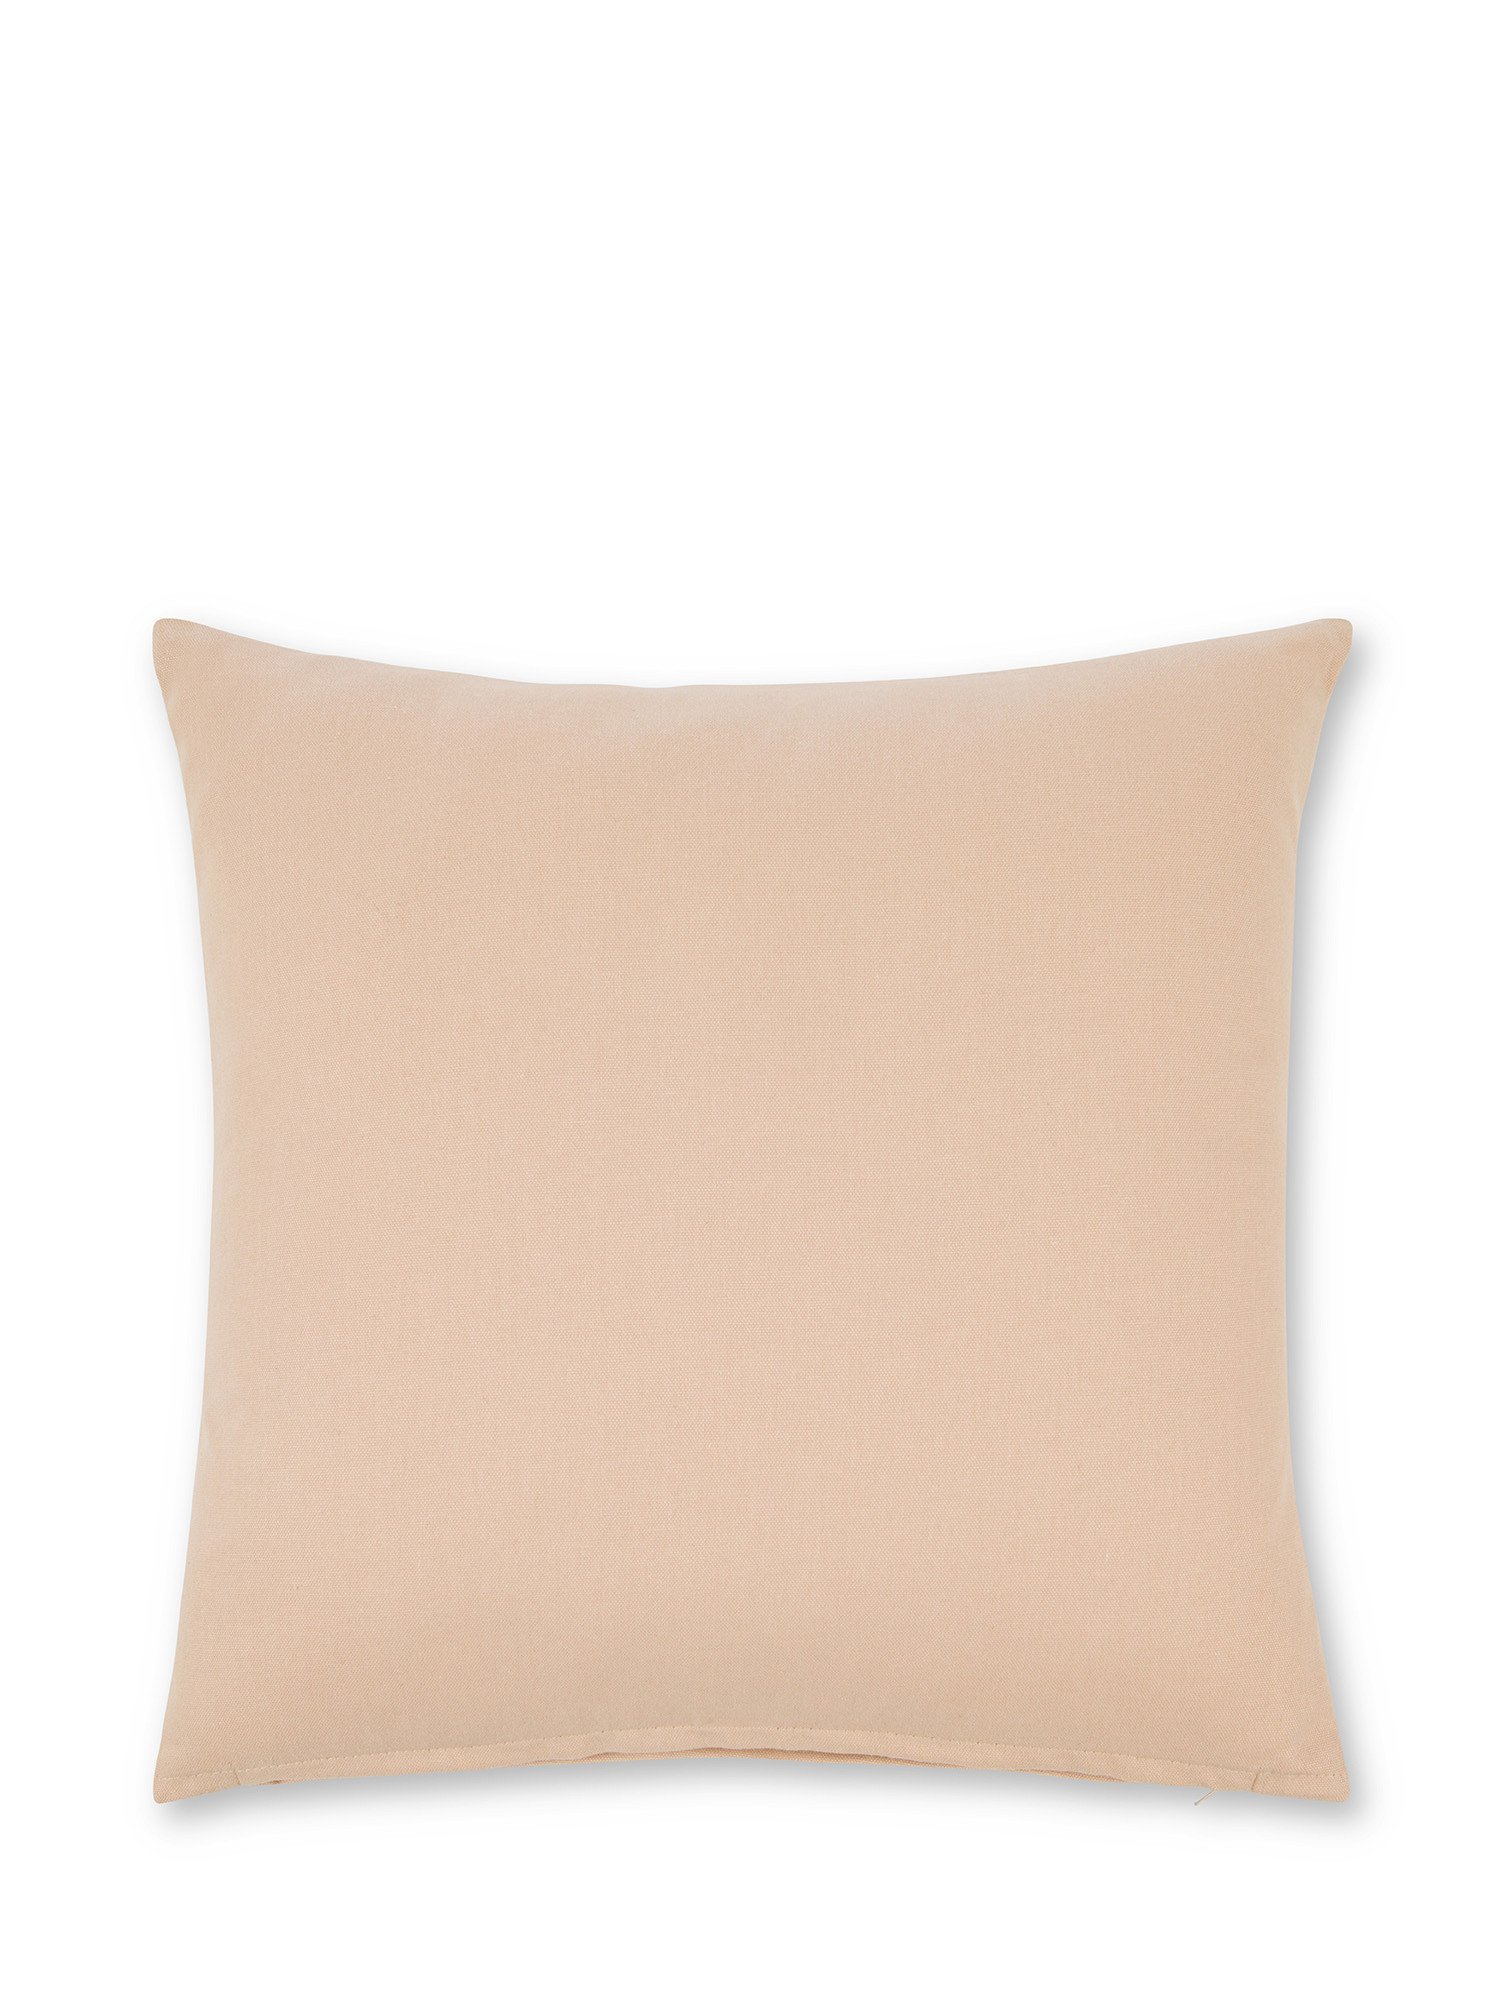 Cotton cushion with embroidered frame 45x45cm, Light Beige, large image number 1